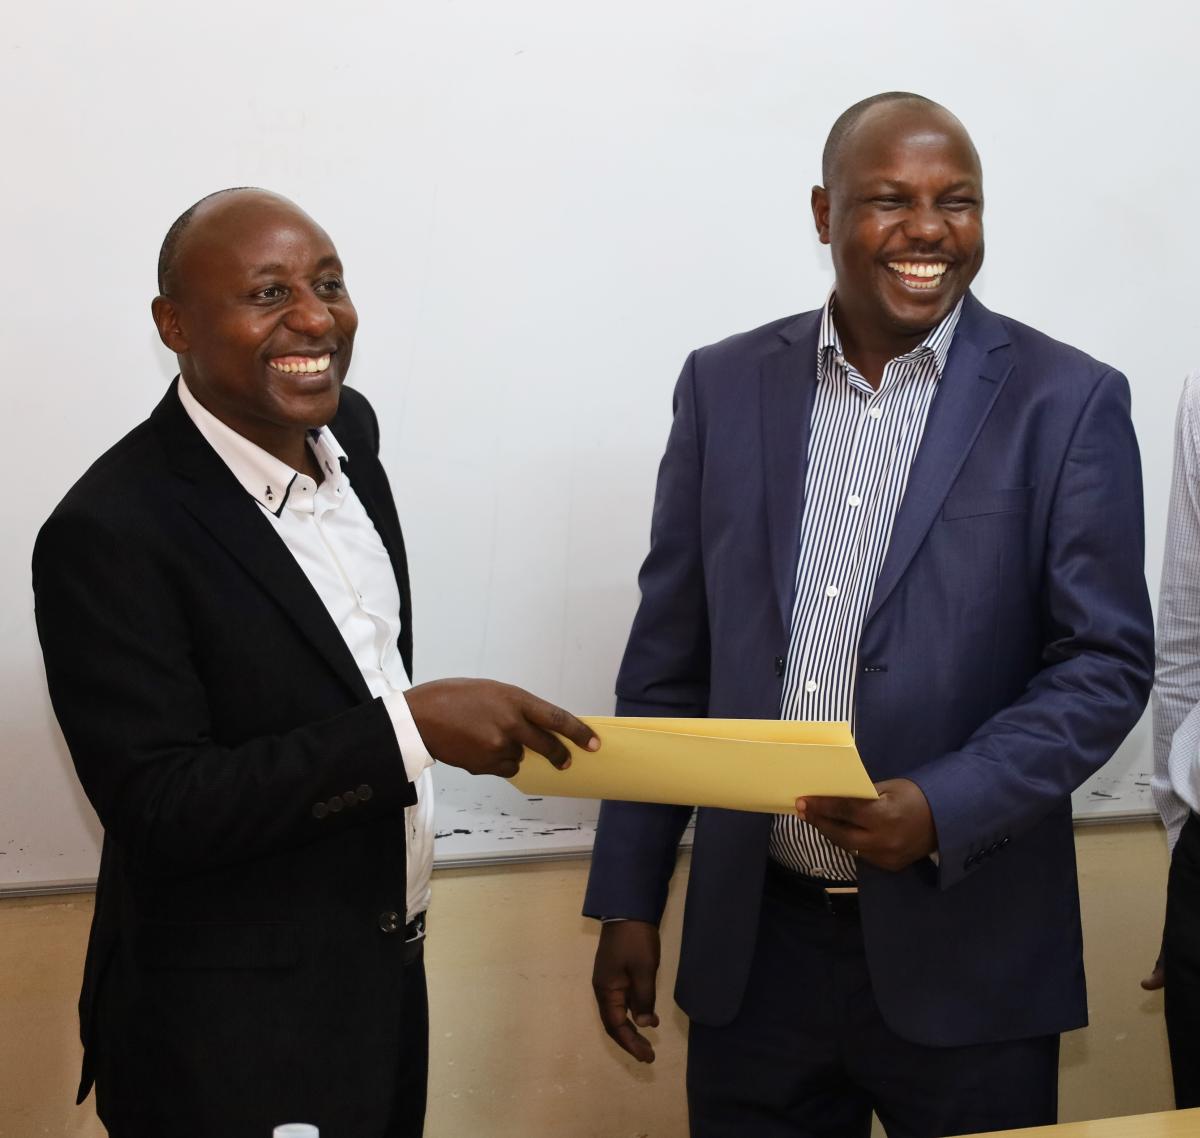 Prof. Eddy Walakira hands over to Dr. Denis Muhangi